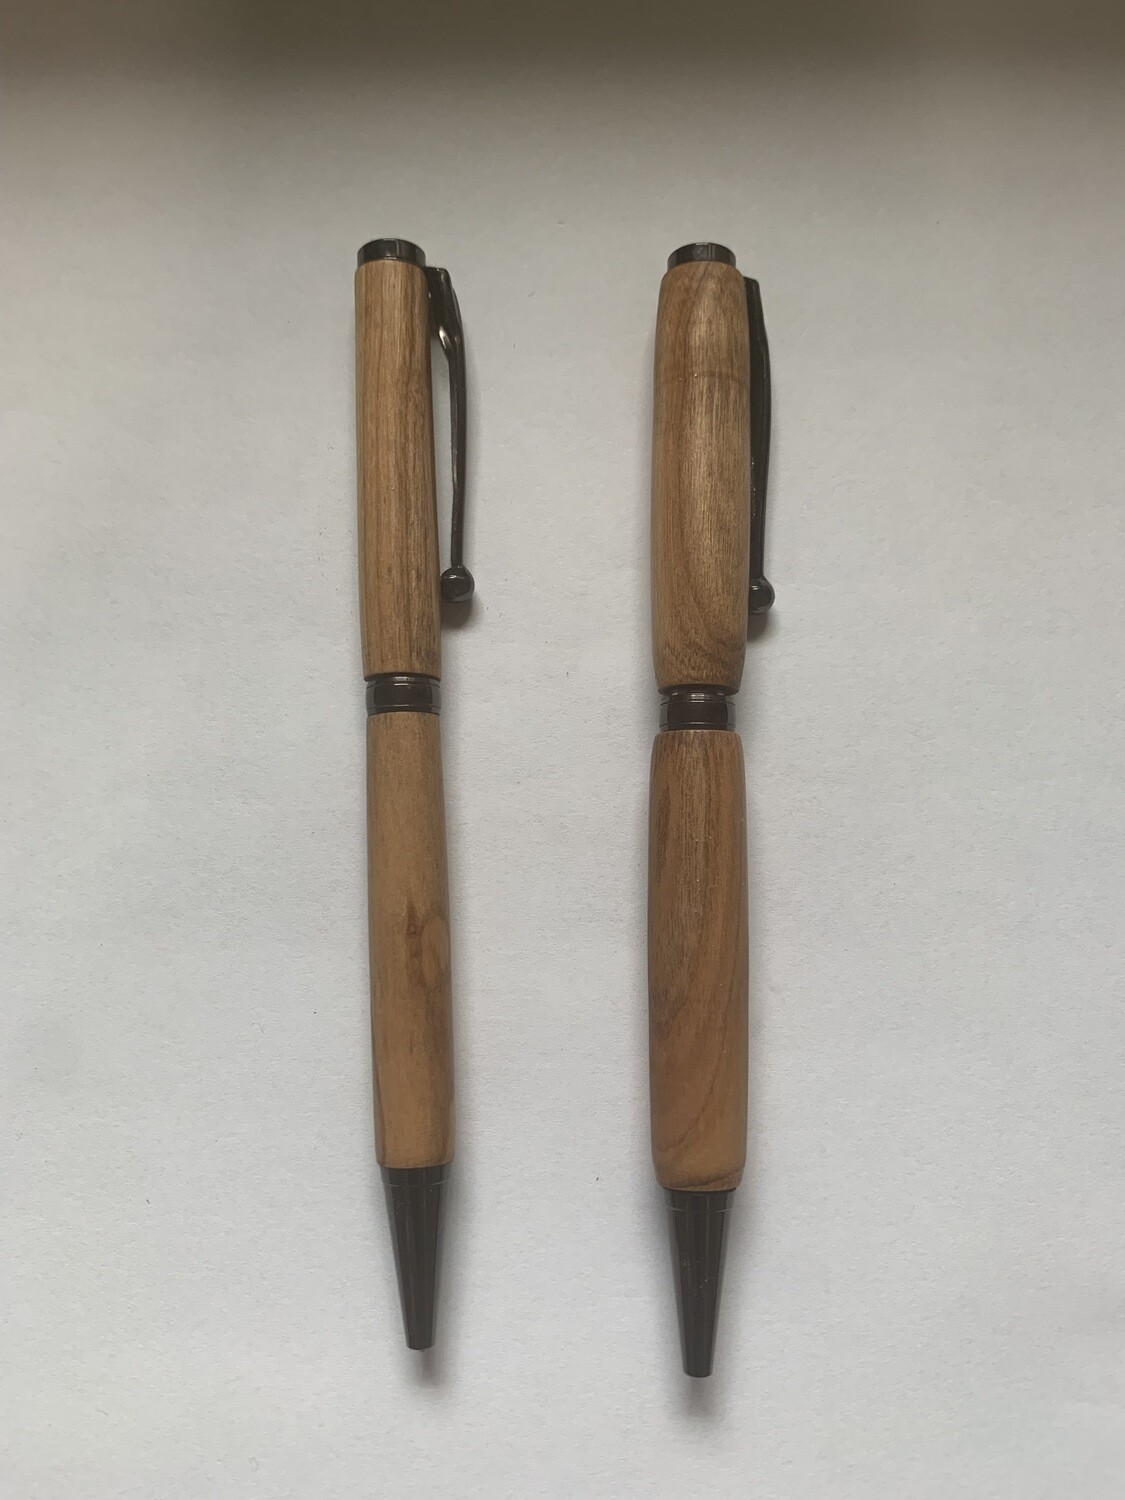 Pen - Cherry wood with black accents